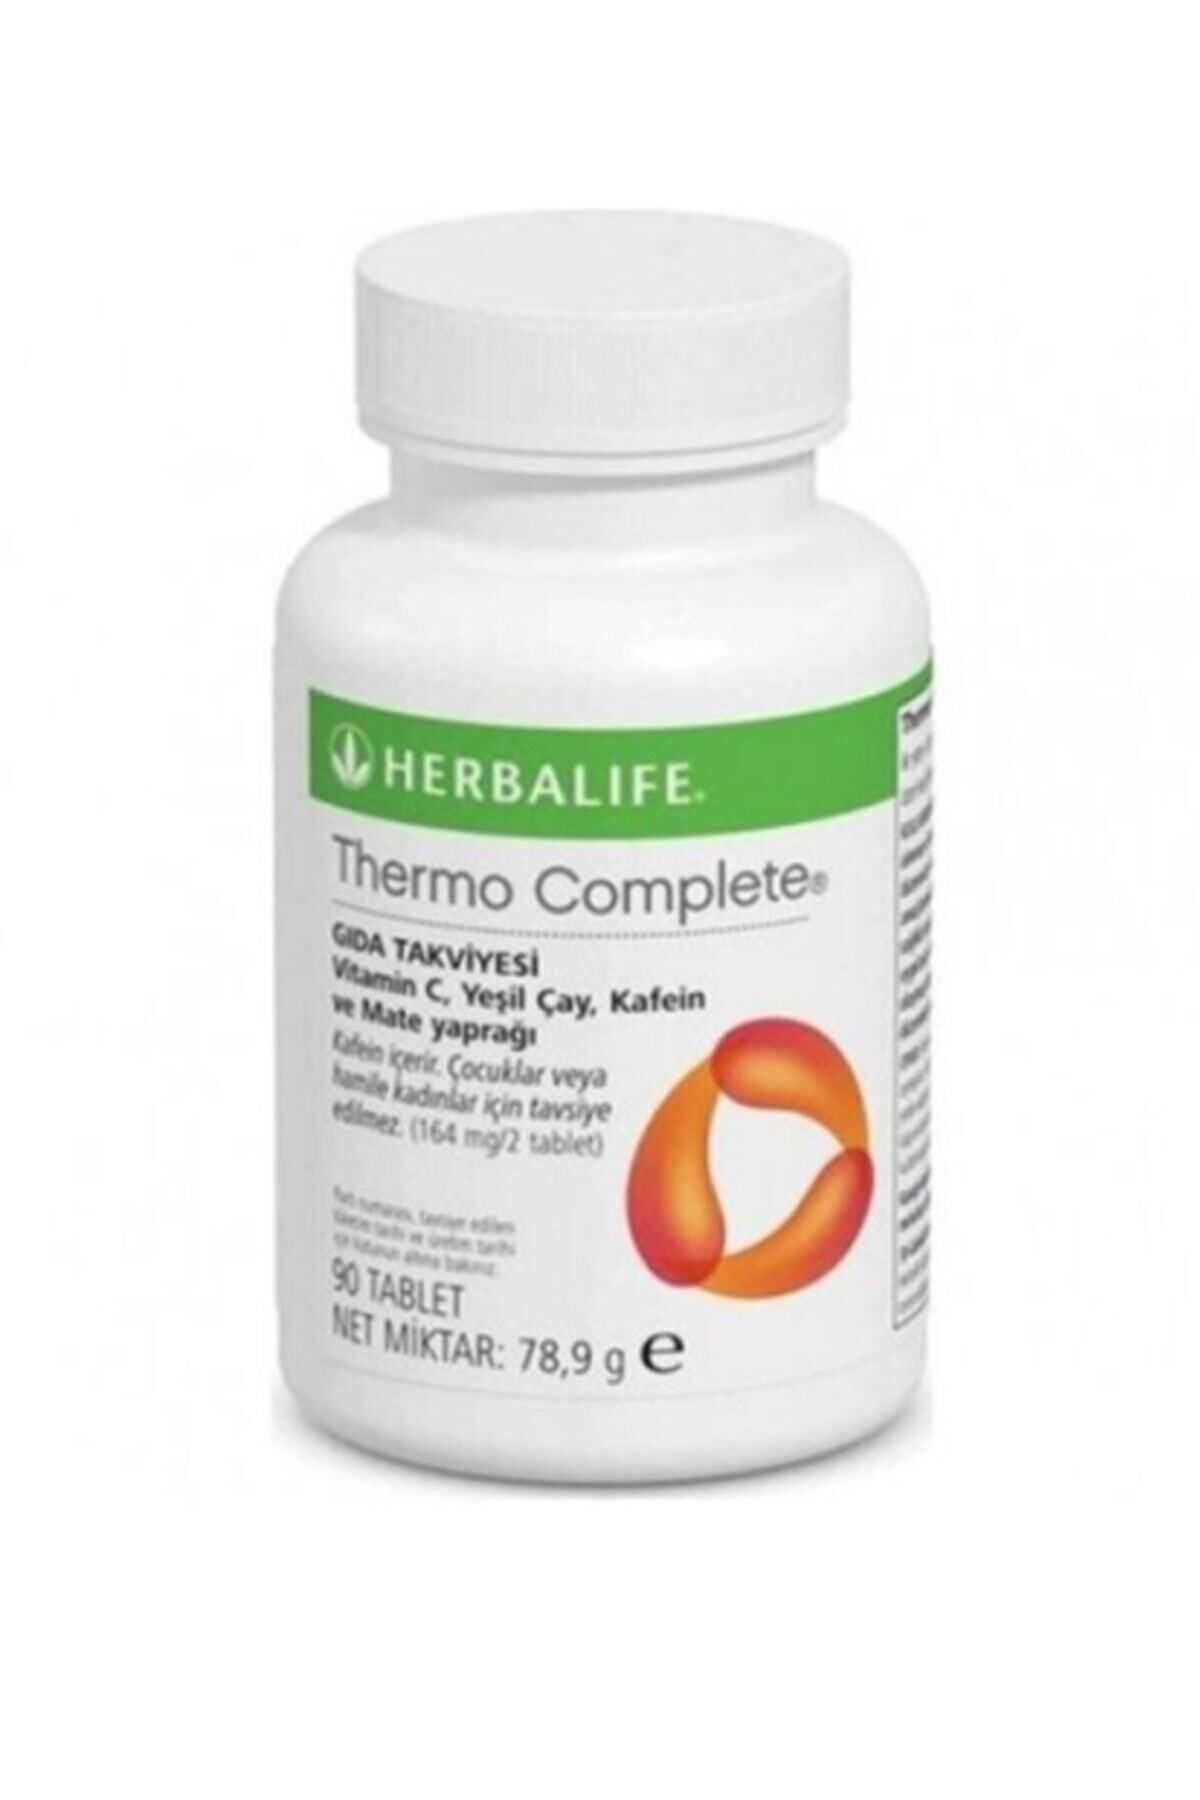 Herbalife Thermo Complete